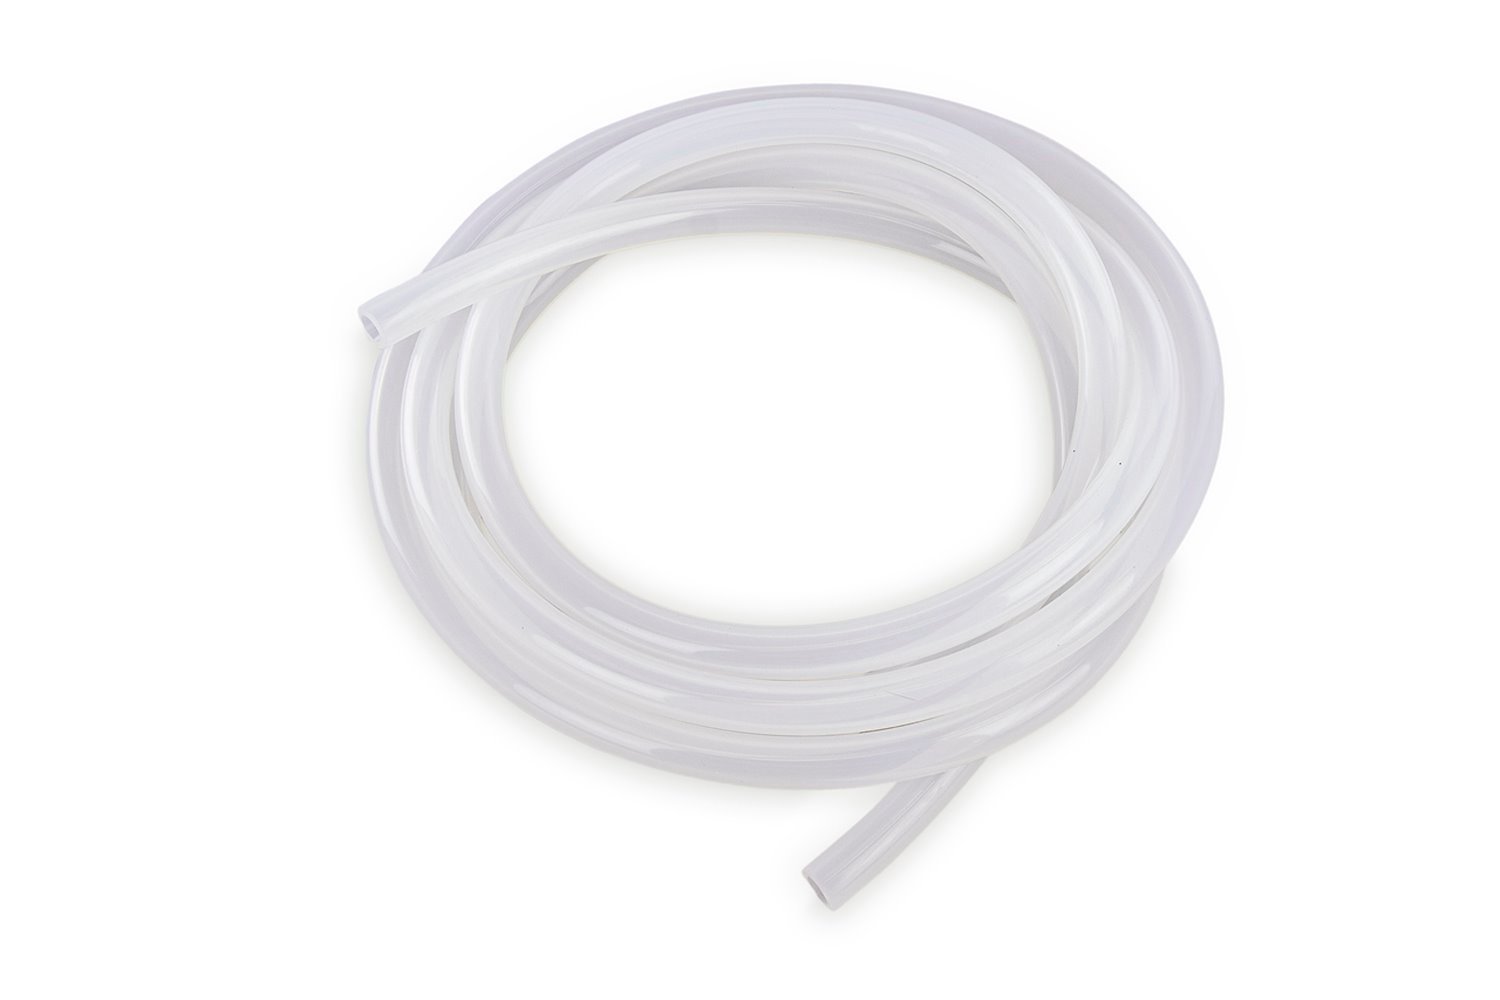 HTSVH10-CLEARx25 High-Temperature Silicone Vacuum Hose Tubing, 10 mm ID, 25 ft. Roll, Clear